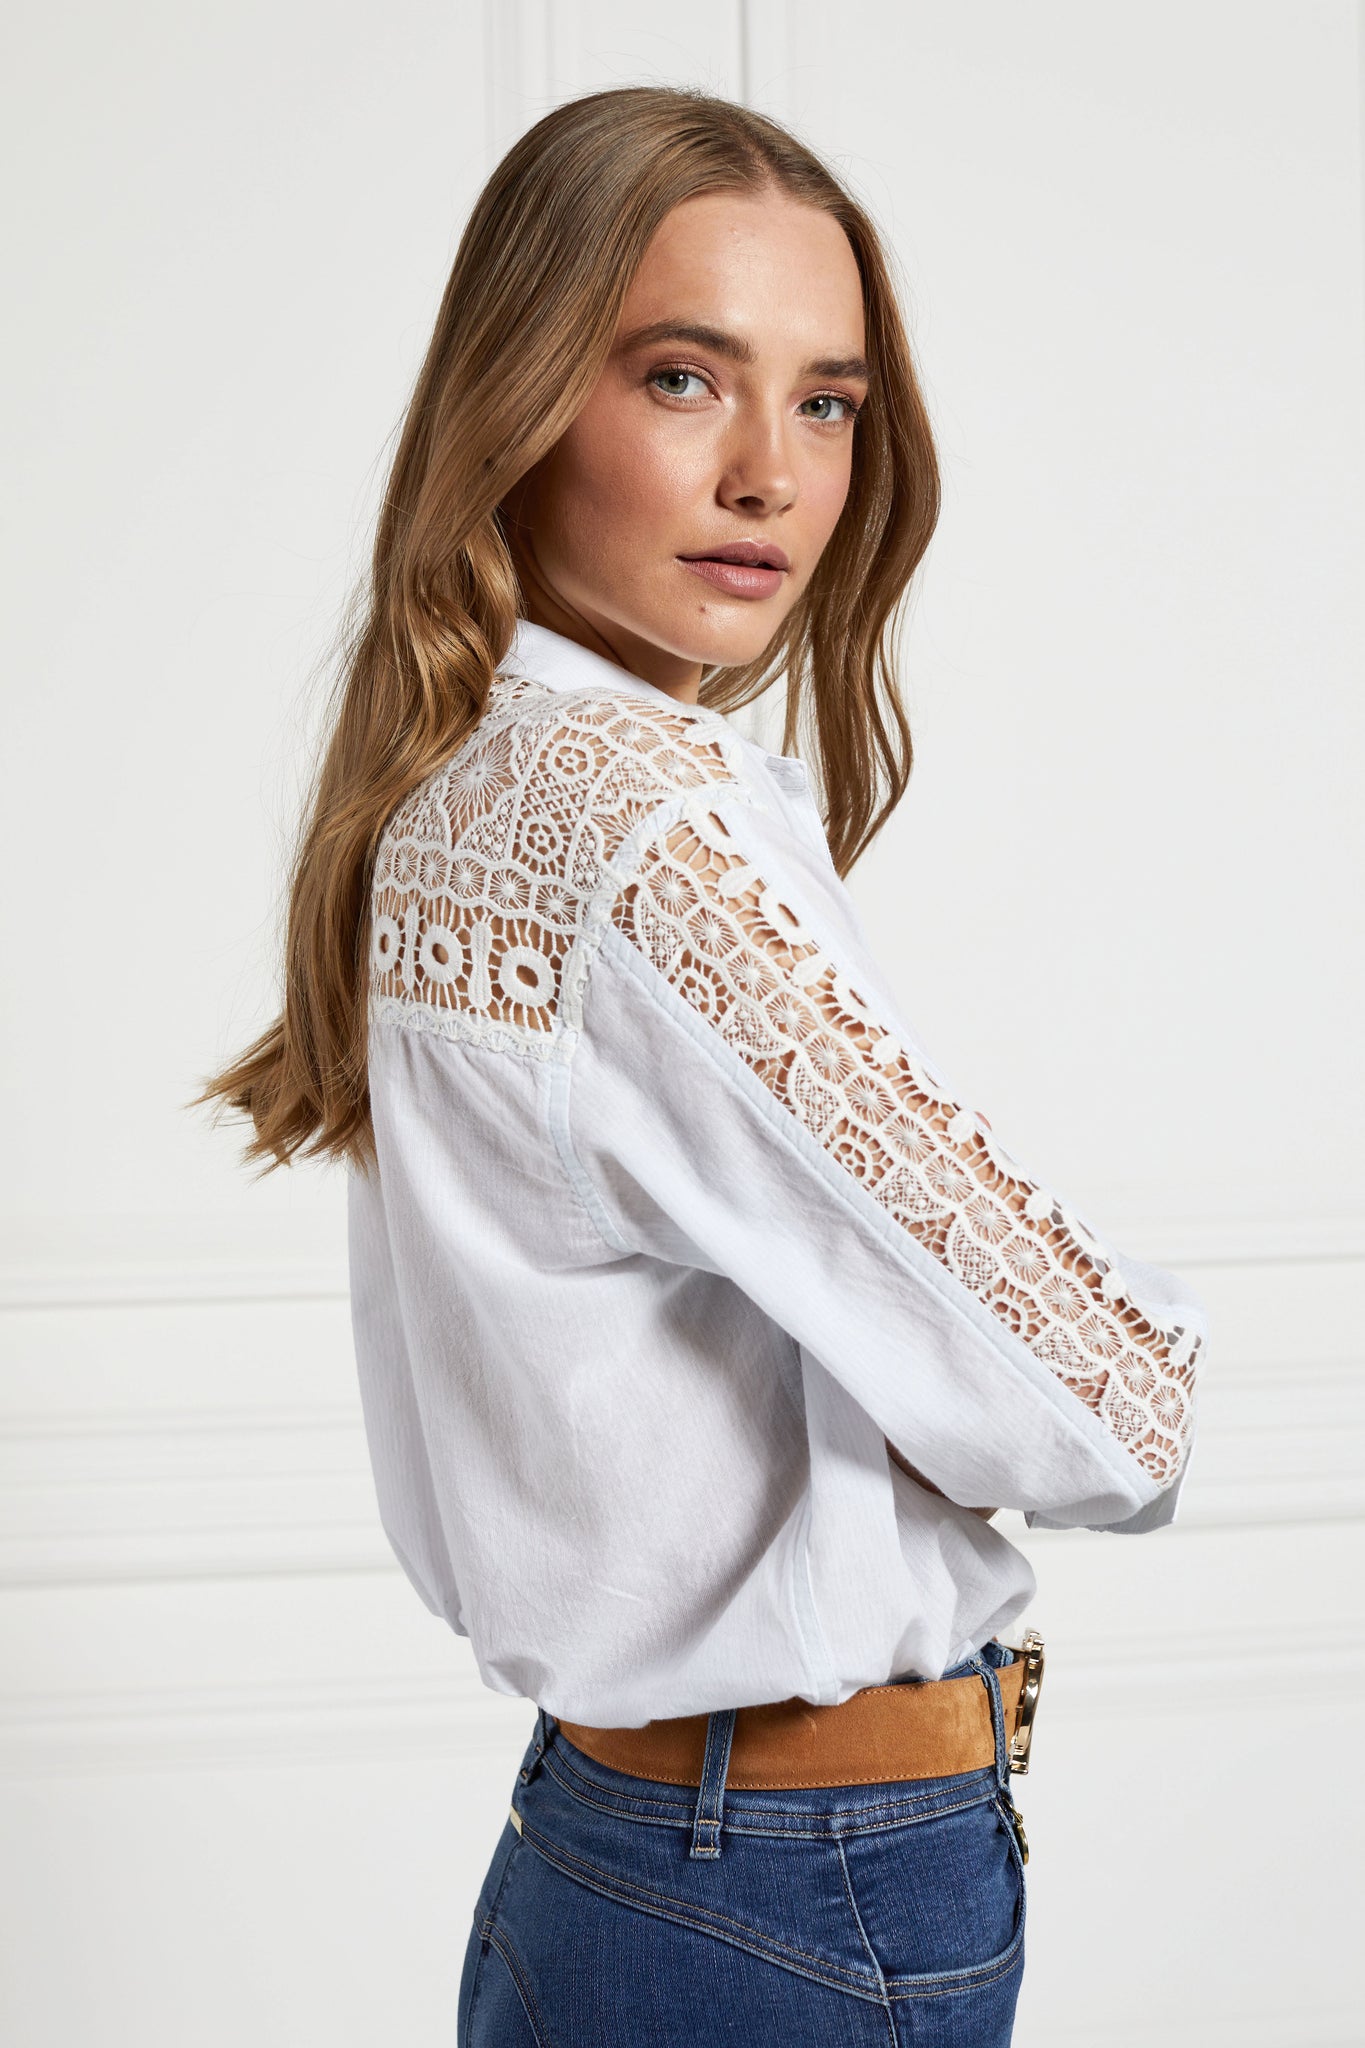 relaxed shirt with pale blue and white stripes with lace panel insert across the back yolk and down the sleeves